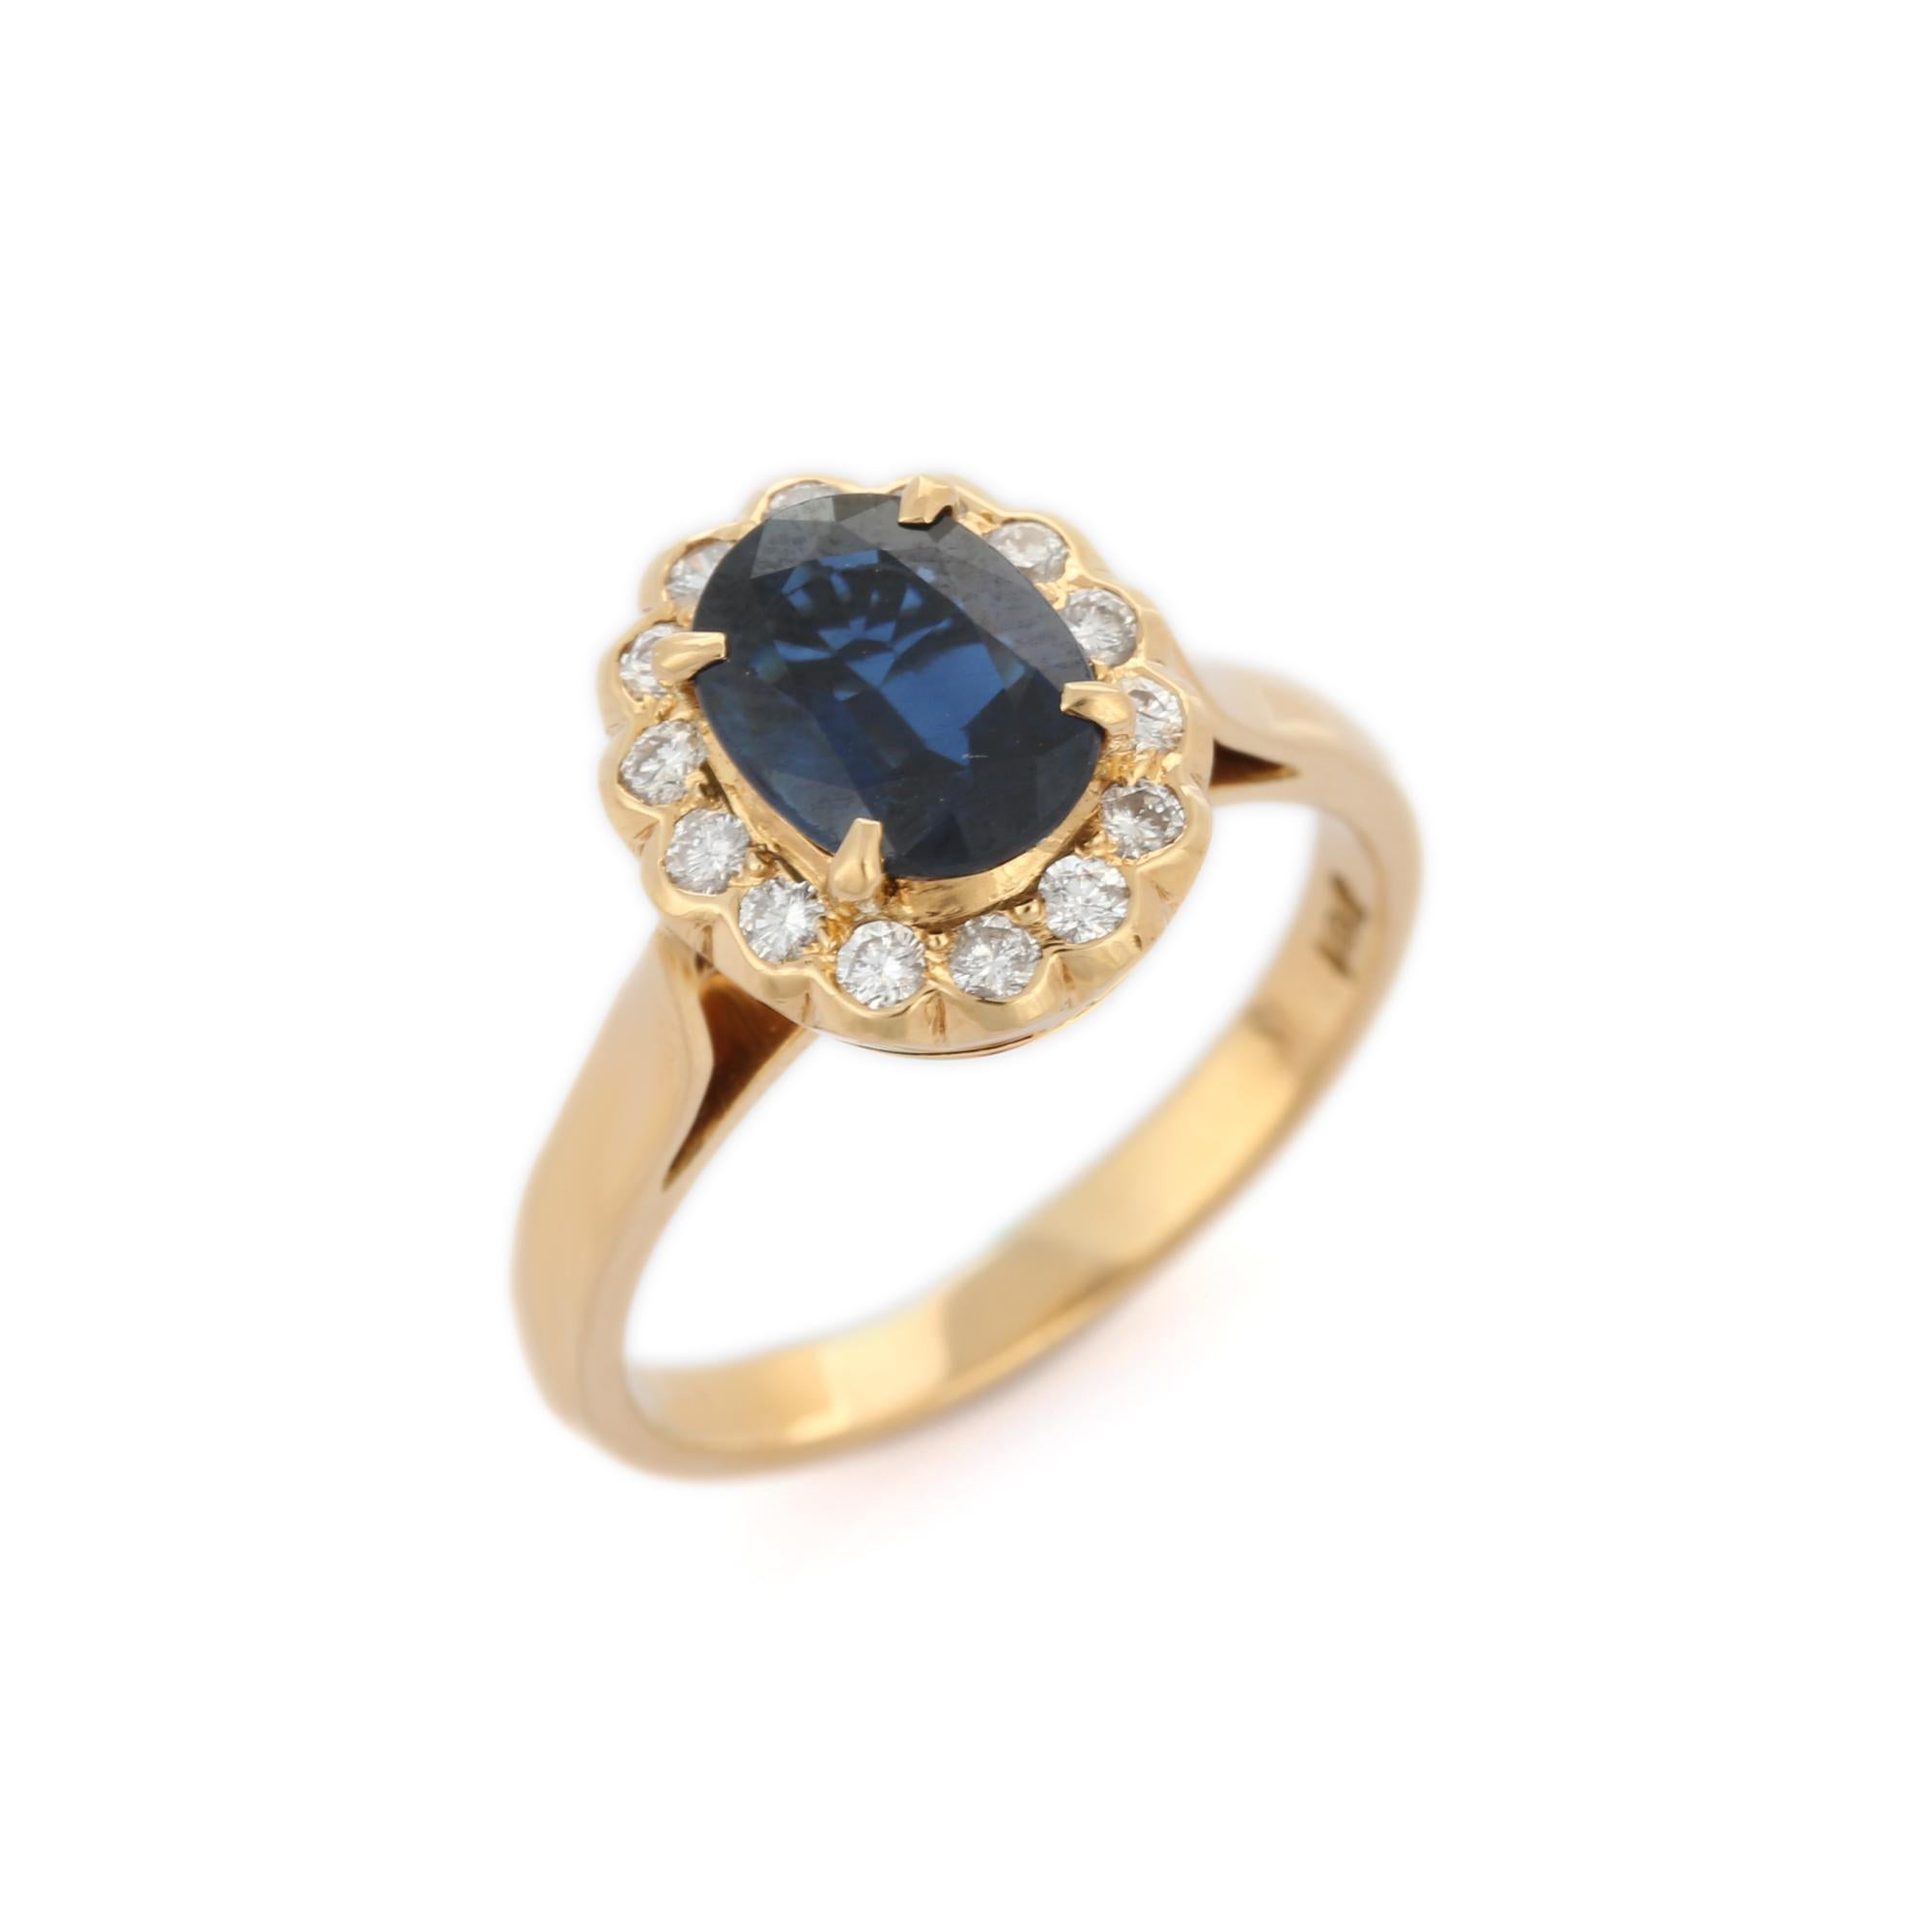 For Sale:  Vivacious 2.2 Ct Blue Sapphire and Diamond Halo Wedding Ring in 18K Yellow Gold 5